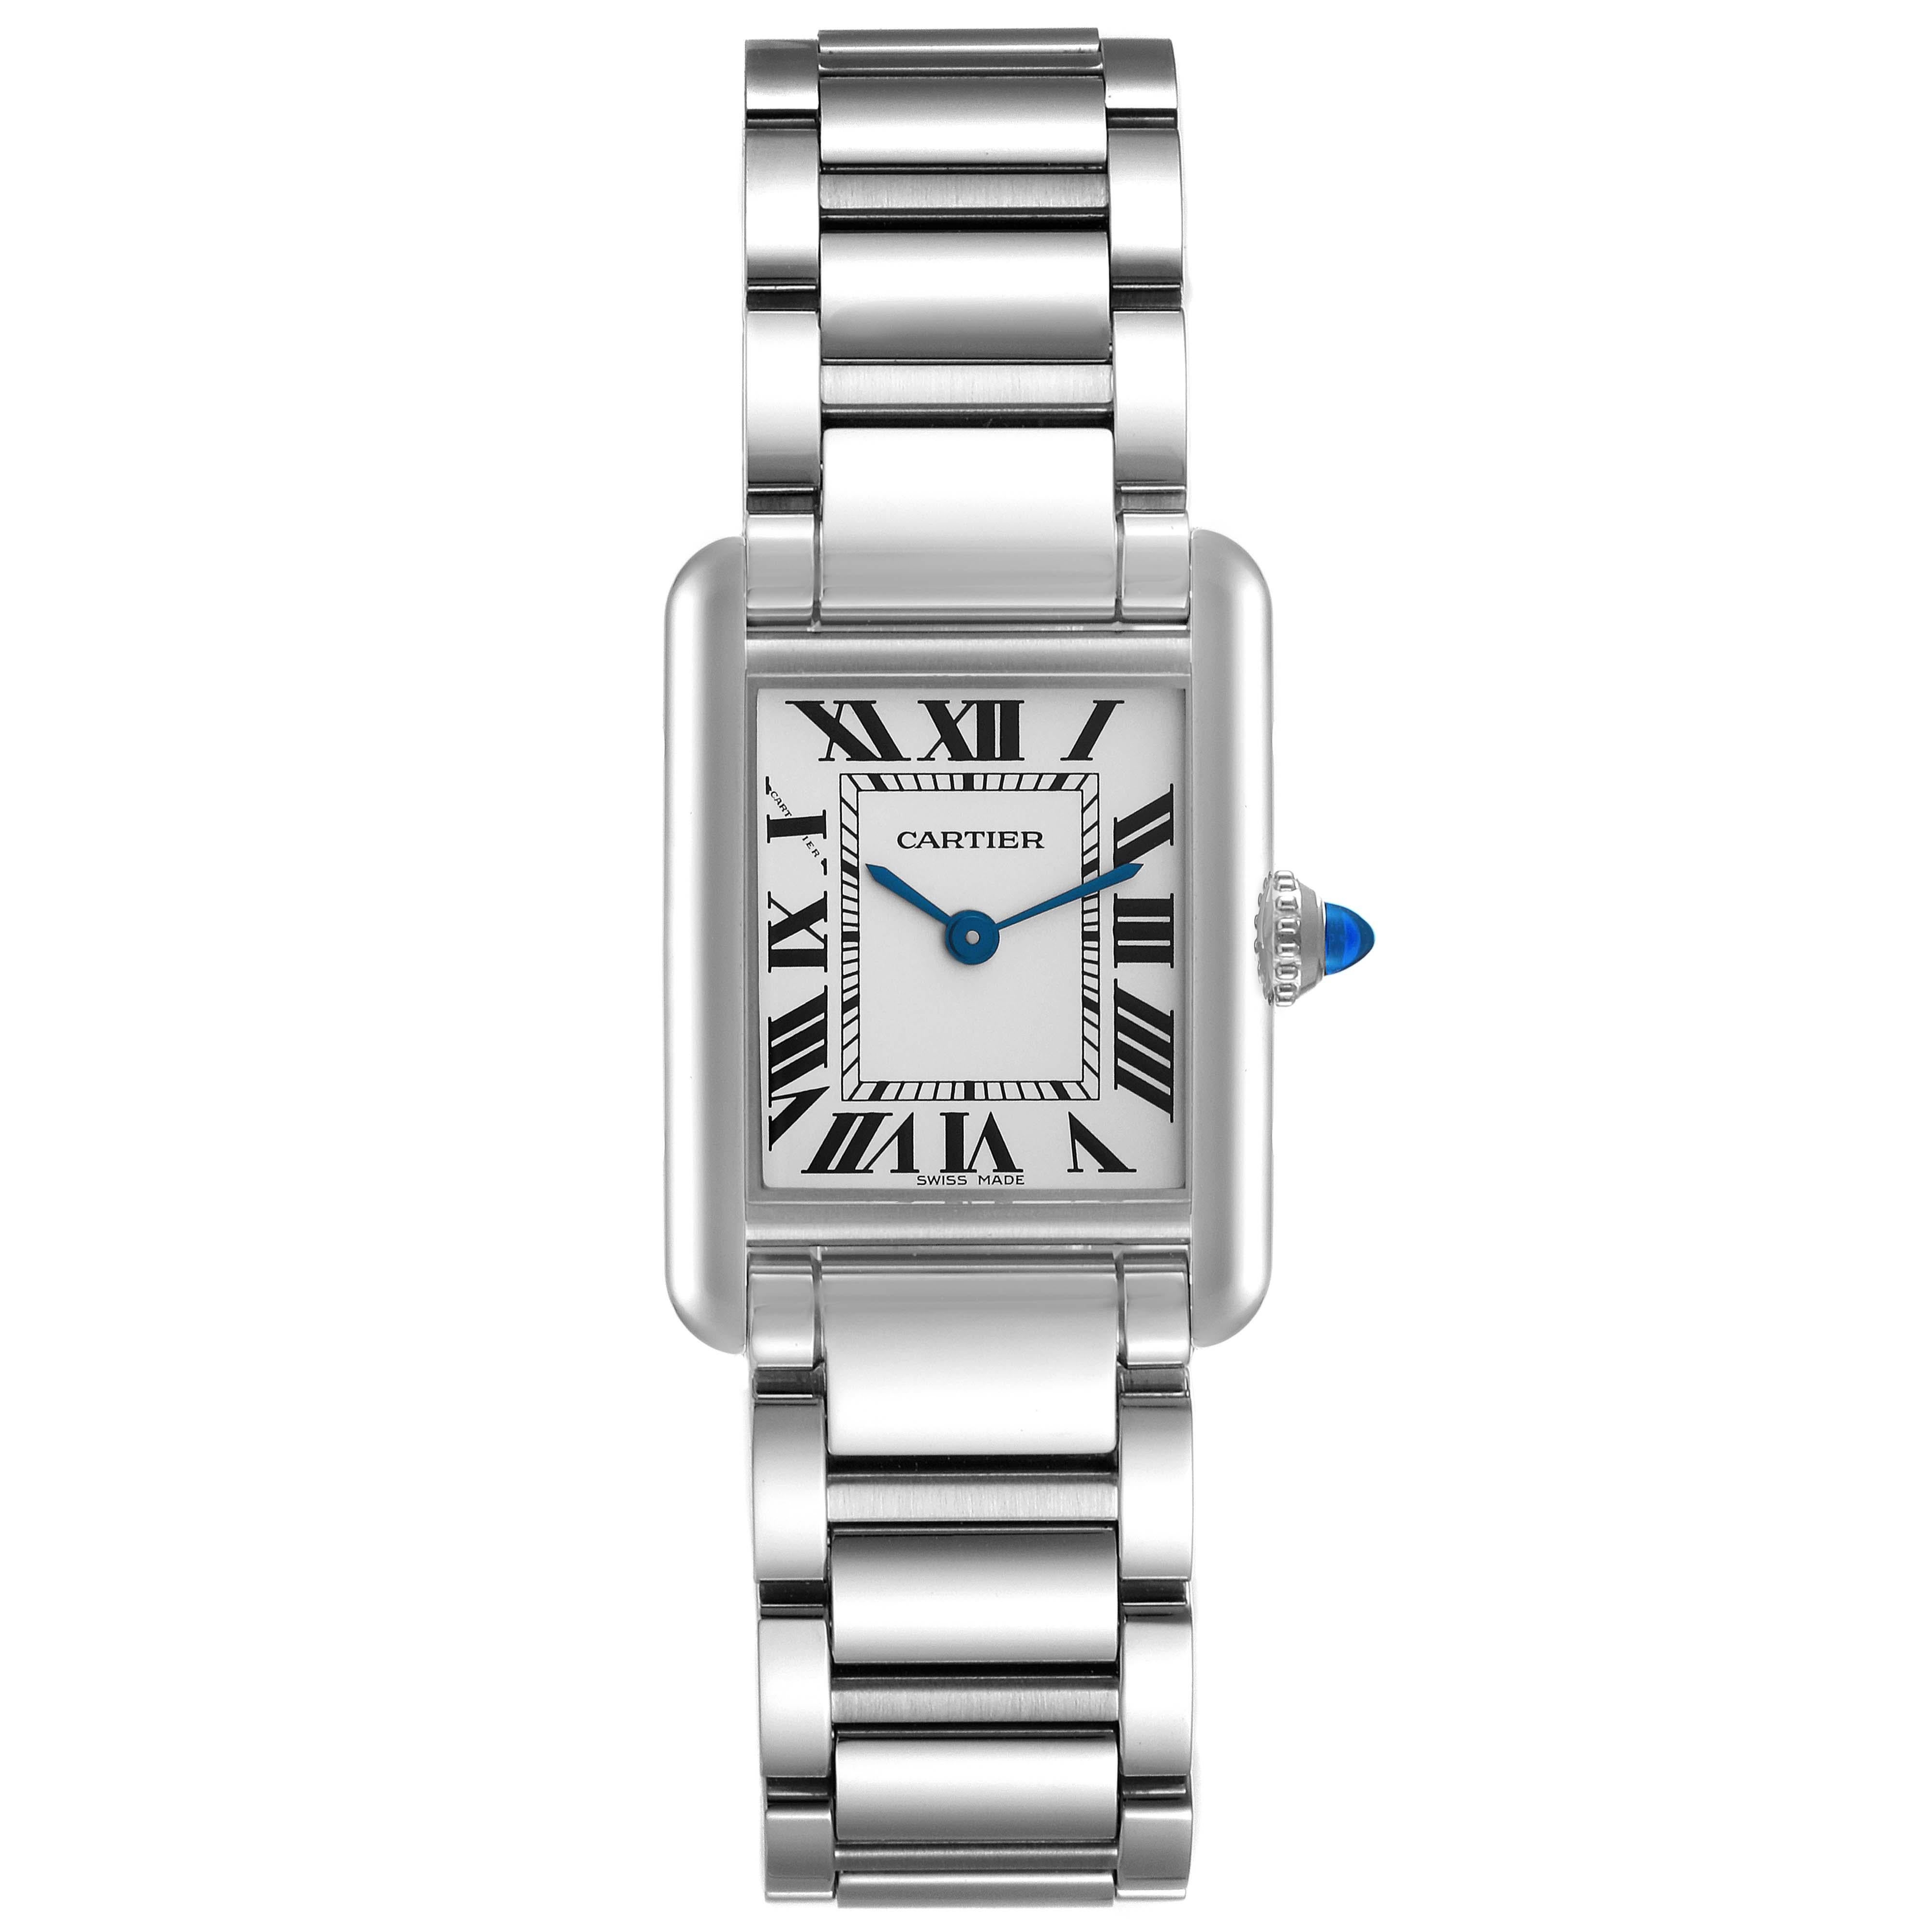 Cartier Tank Must Small Silver Dial Steel Ladies Watch WSTA0051 Box Card. Quartz movement. Stainless steel case 29.5 x 22 mm. Circular grained crown set with a blue spinel cabochon. . Scratch resistant sapphire crystal. Silver dial with black Roman